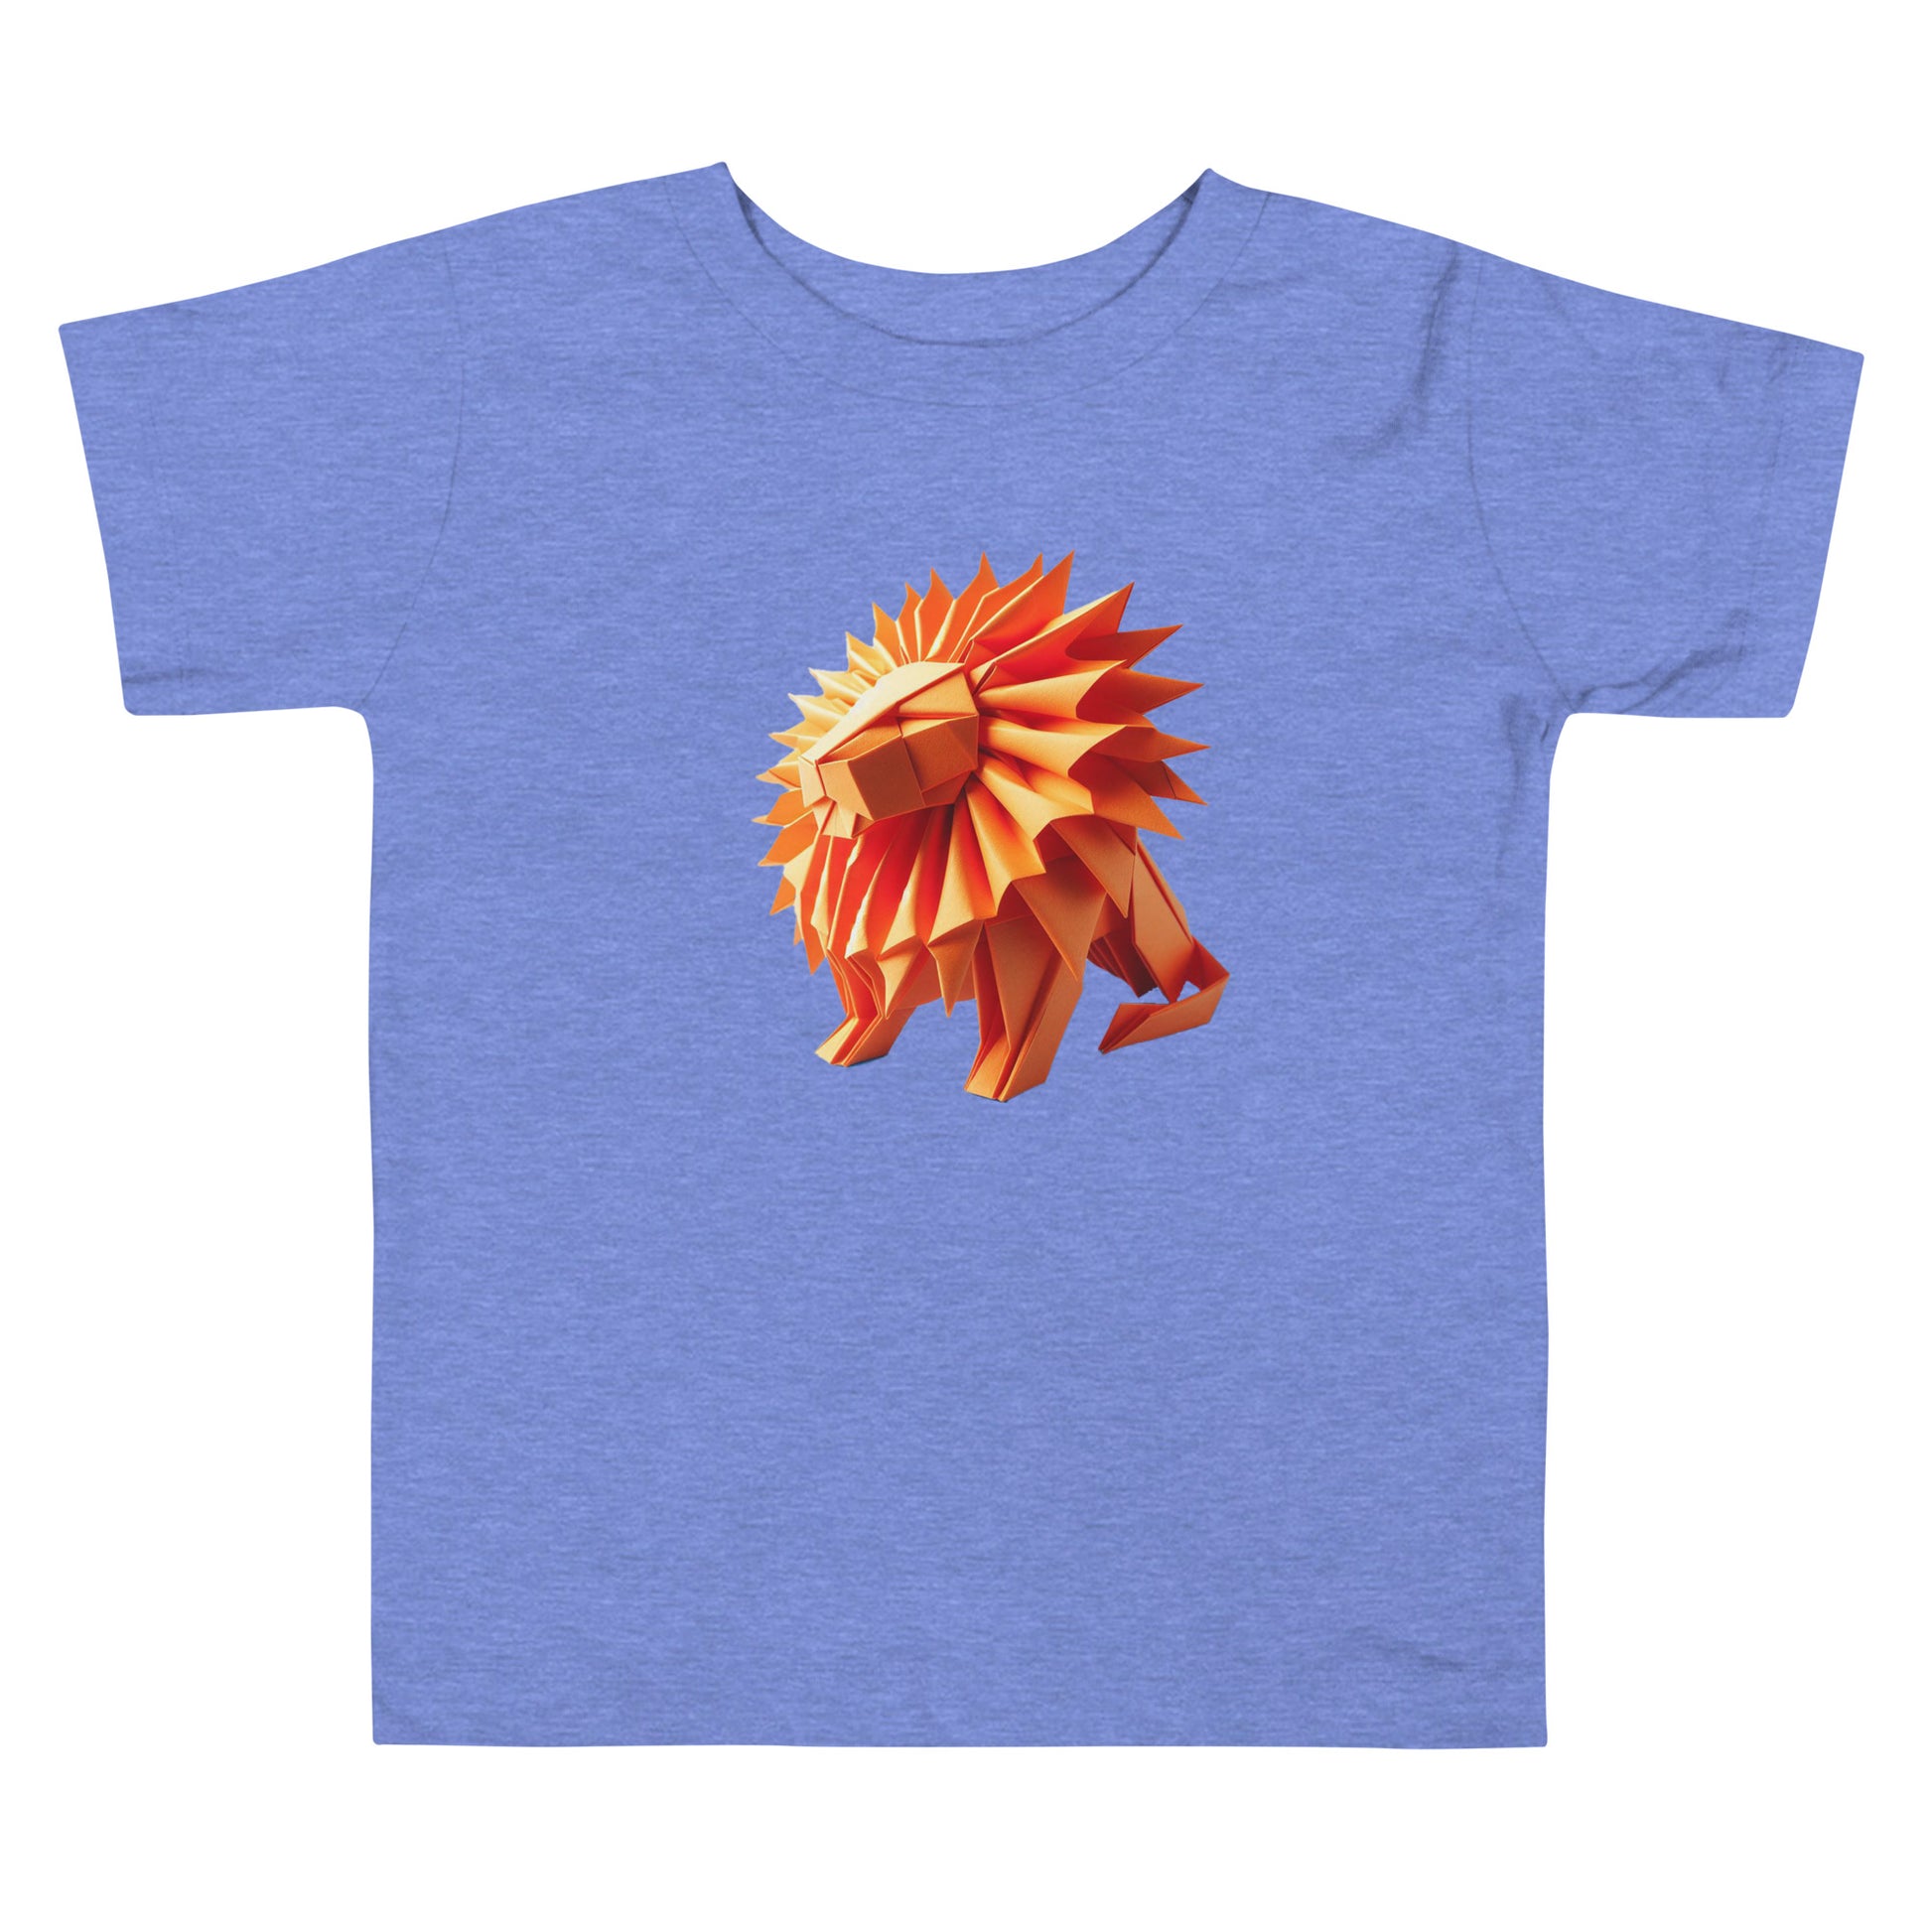 Kids with columbia blue T-shirt with print of a lion